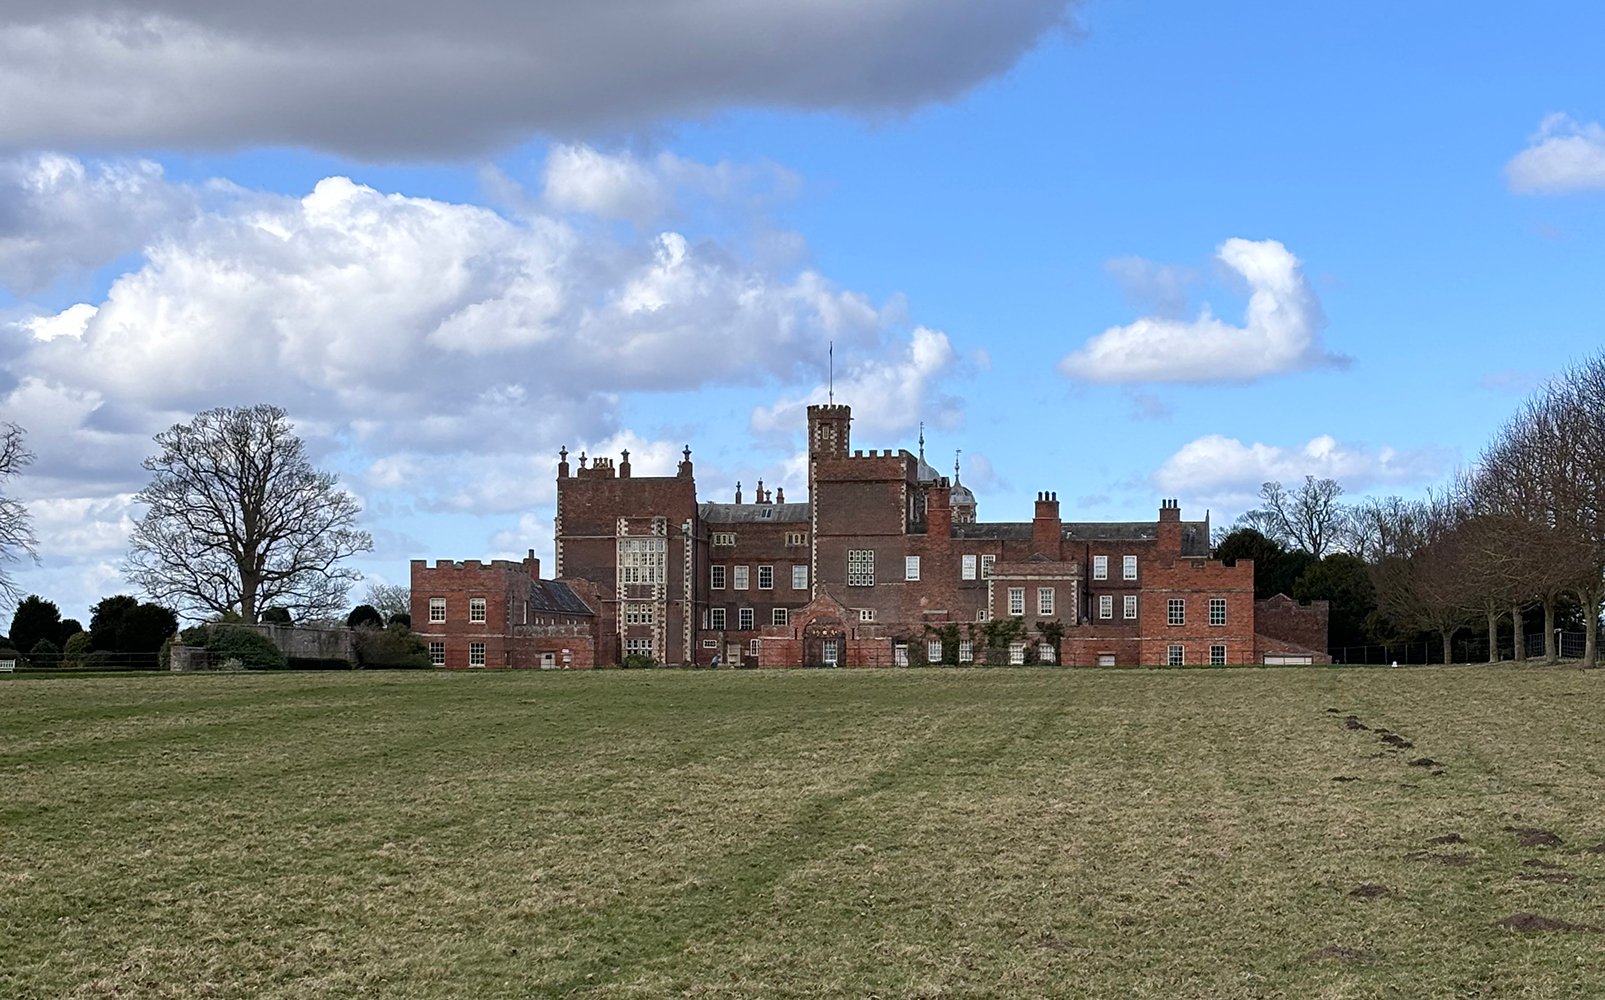 Image name burton constable hall red bricks blue sky and clouds east yorkshire the 12 image from the post A look at the history of Burton Constable Hall, with Dr Emma Wells in Yorkshire.com.